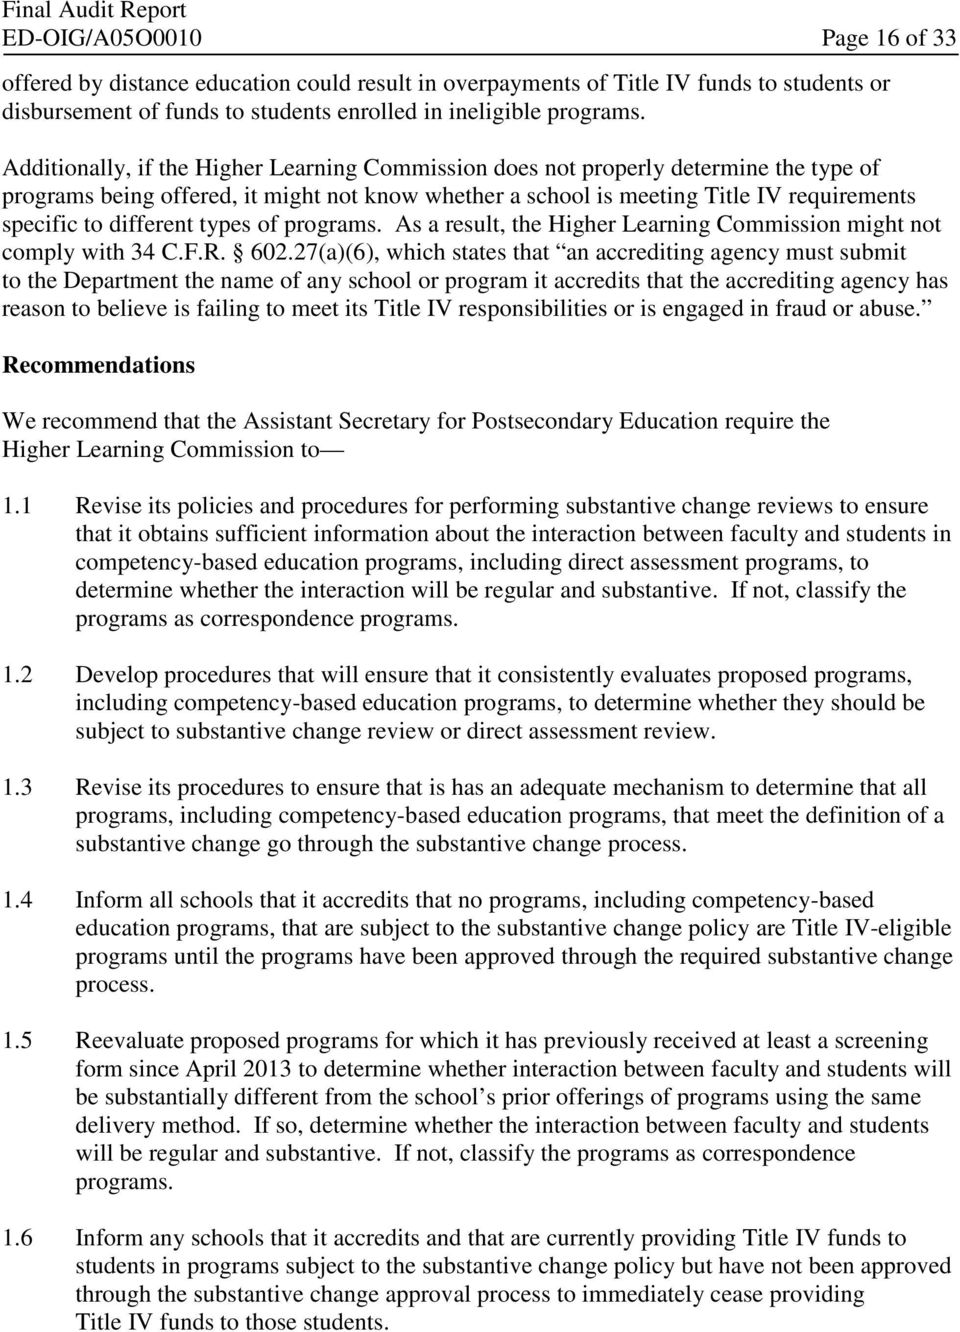 different types of programs. As a result, the Higher Learning Commission might not comply with 34 C.F.R. 602.